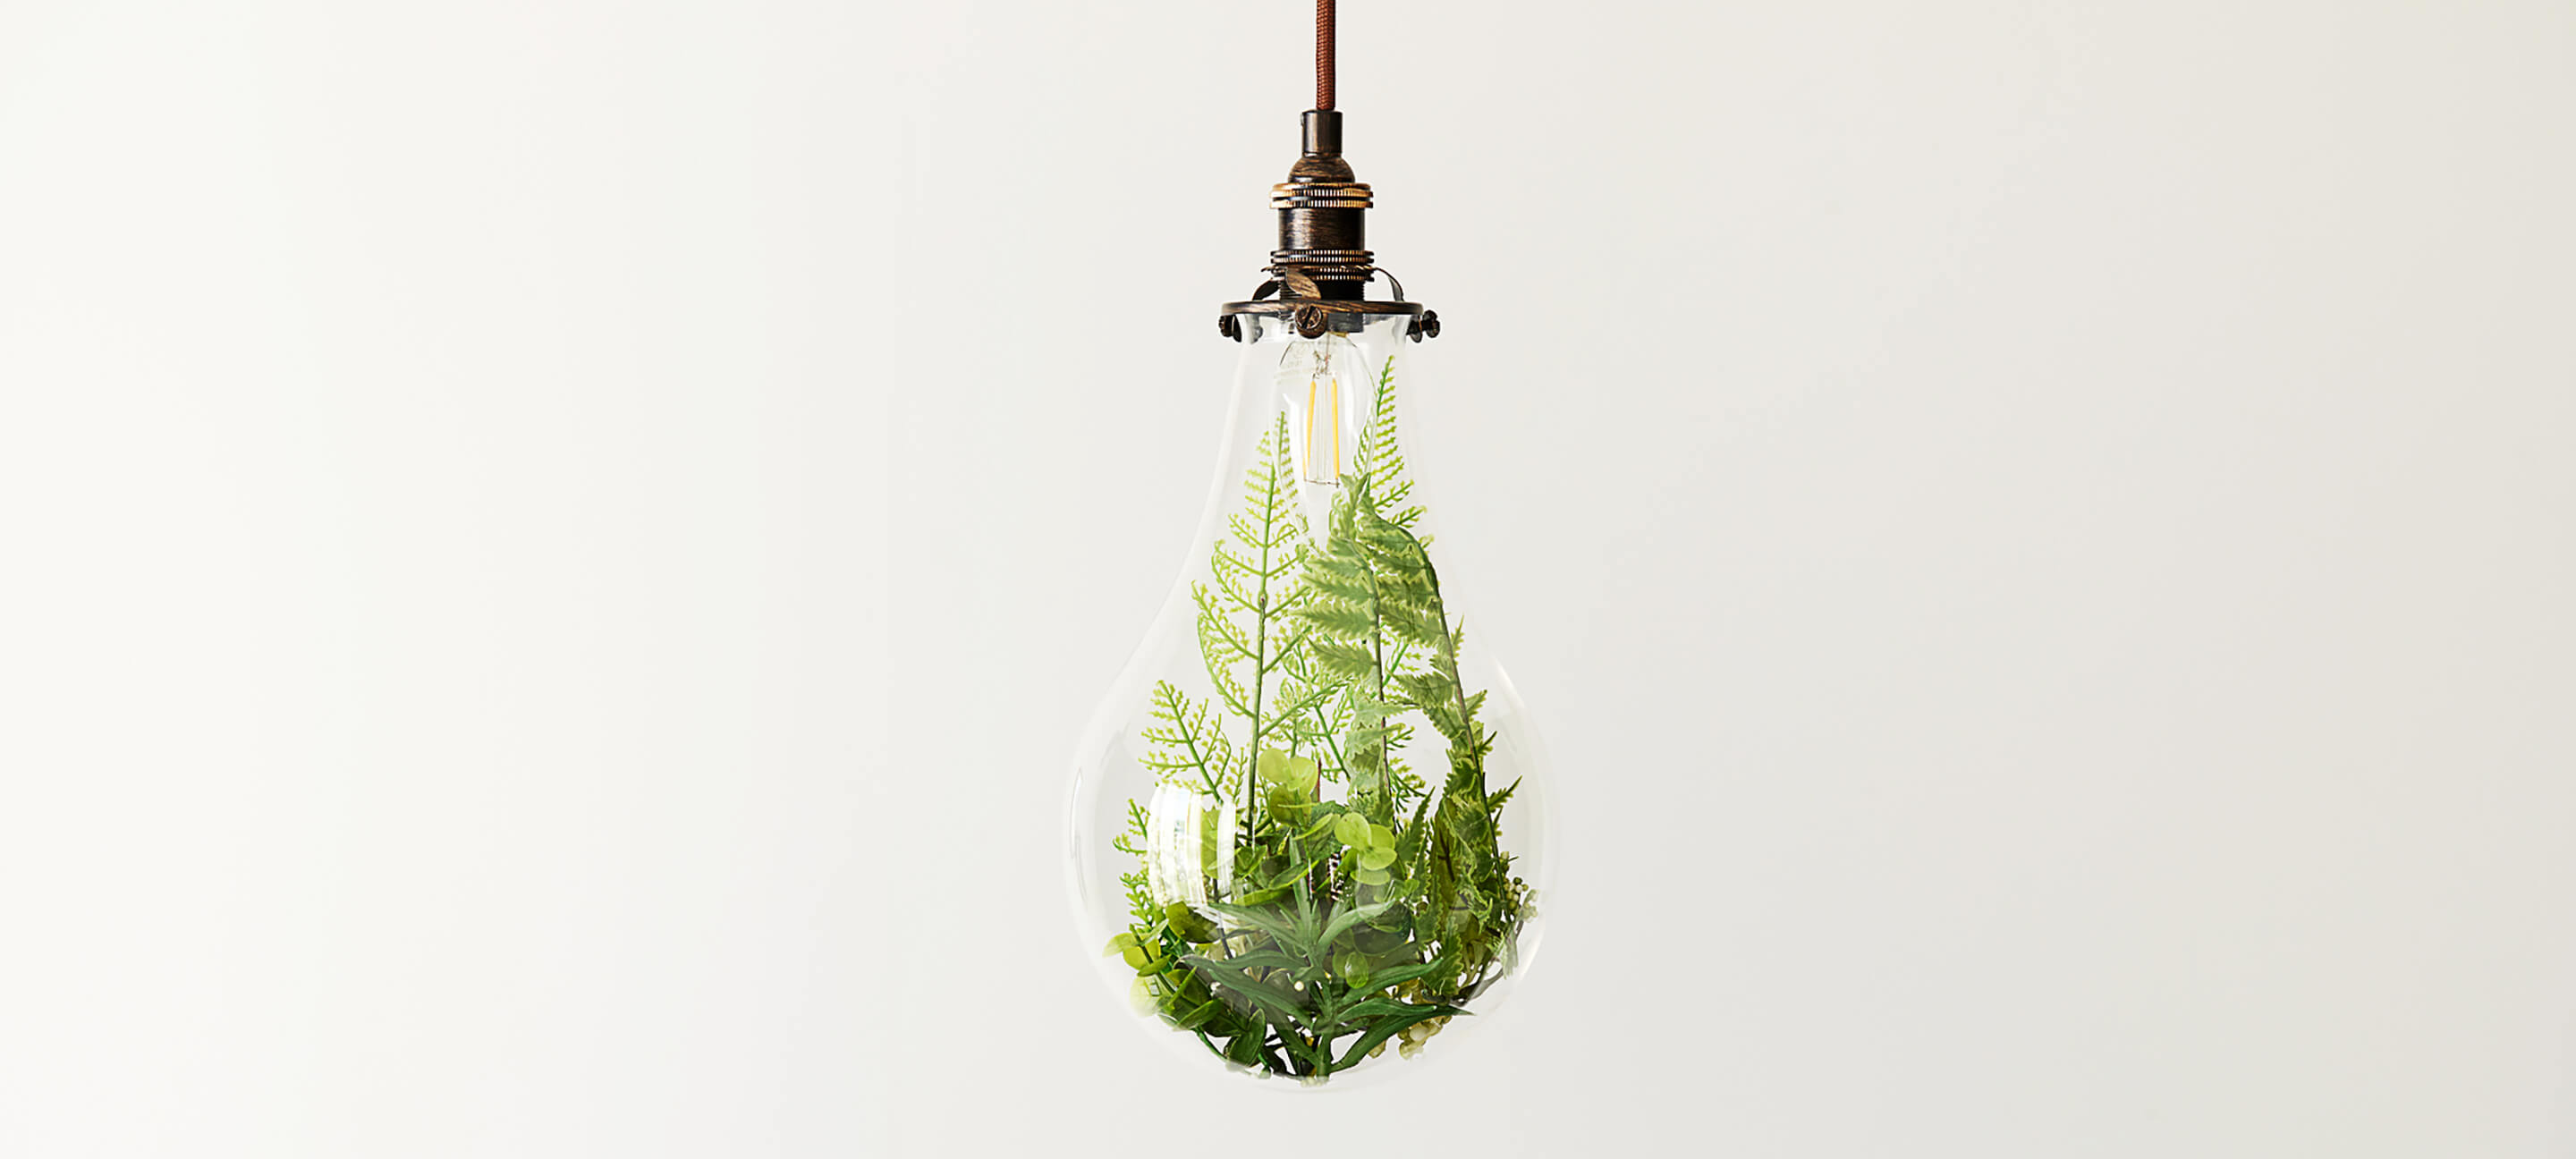 An electric light bulb contains an ecosystem of green foliage.